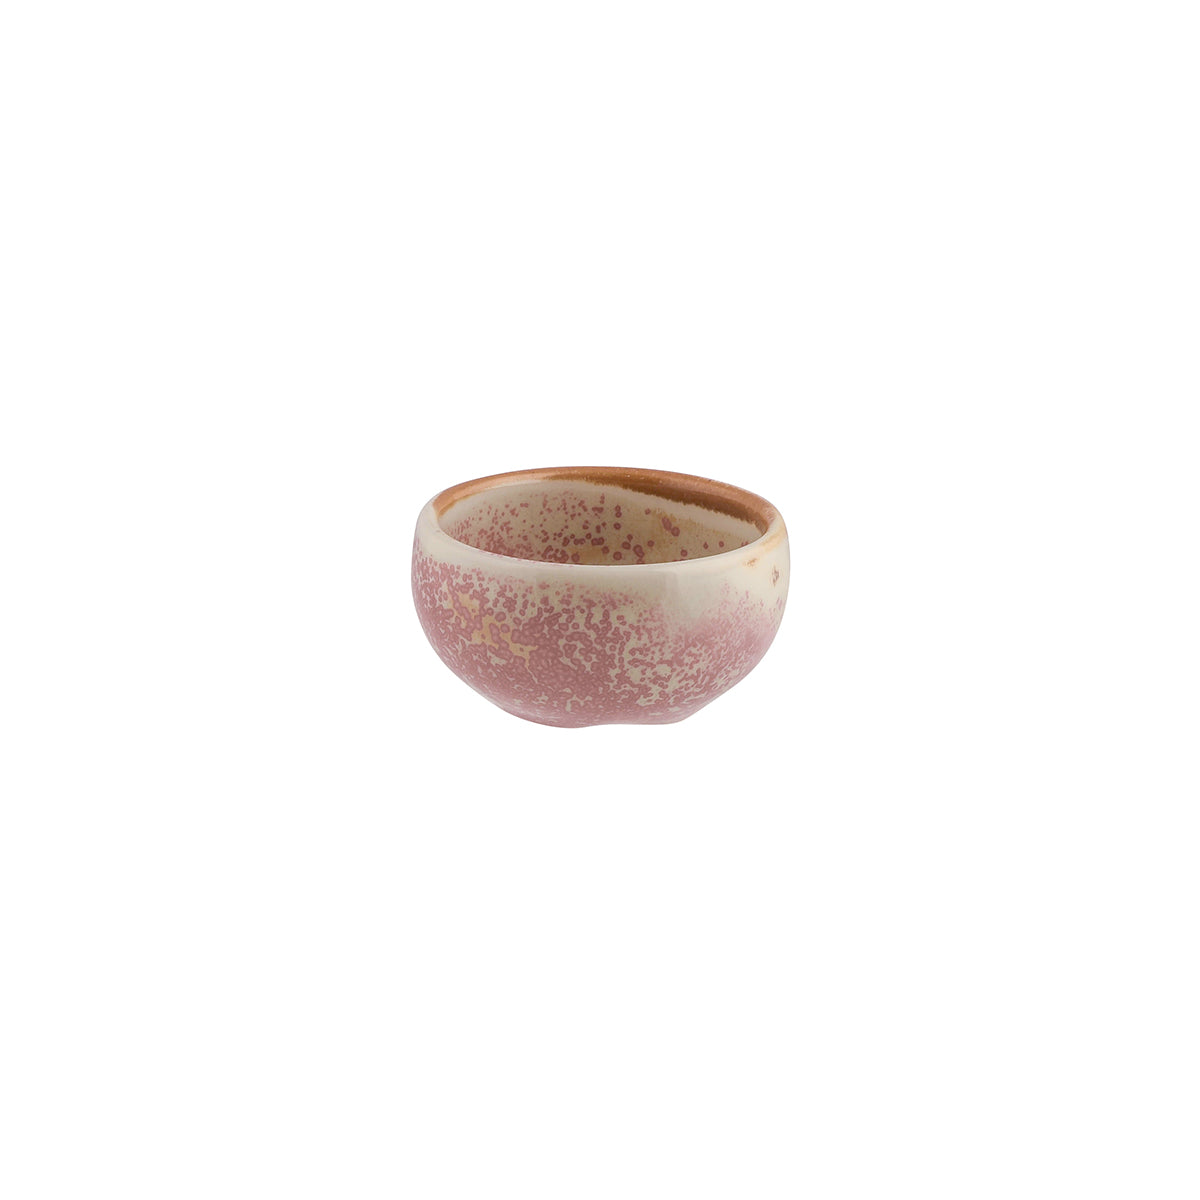 Ramekin - 70x35mm, 75ml, Pink, Icon from Moda Porcelain. made out of Porcelain and sold in boxes of 24. Hospitality quality at wholesale price with The Flying Fork! 